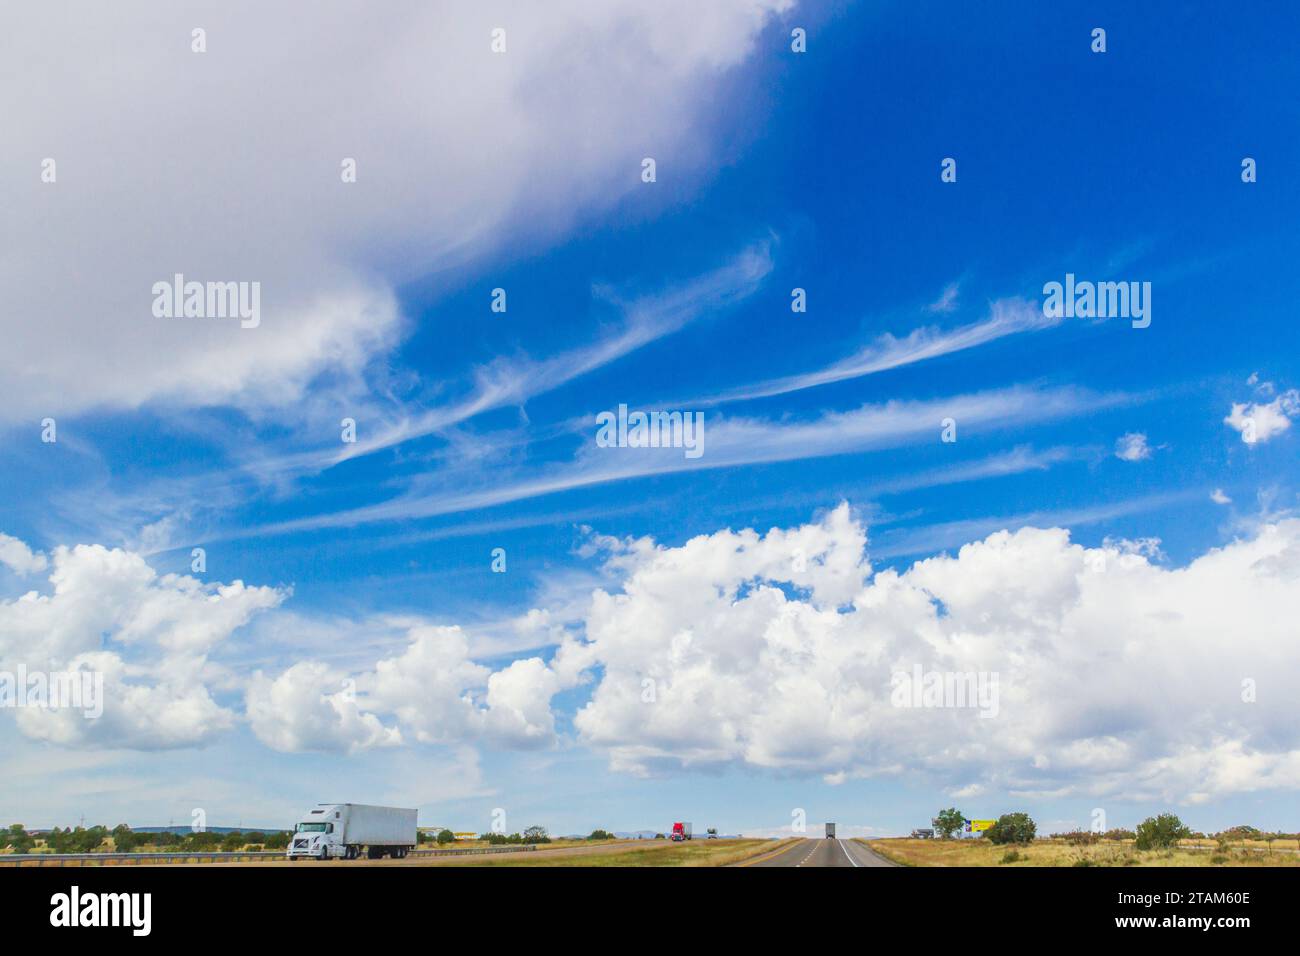 Patterns in cloud formations against a blue sky over Interstate 40 in New Mexico. Stock Photo